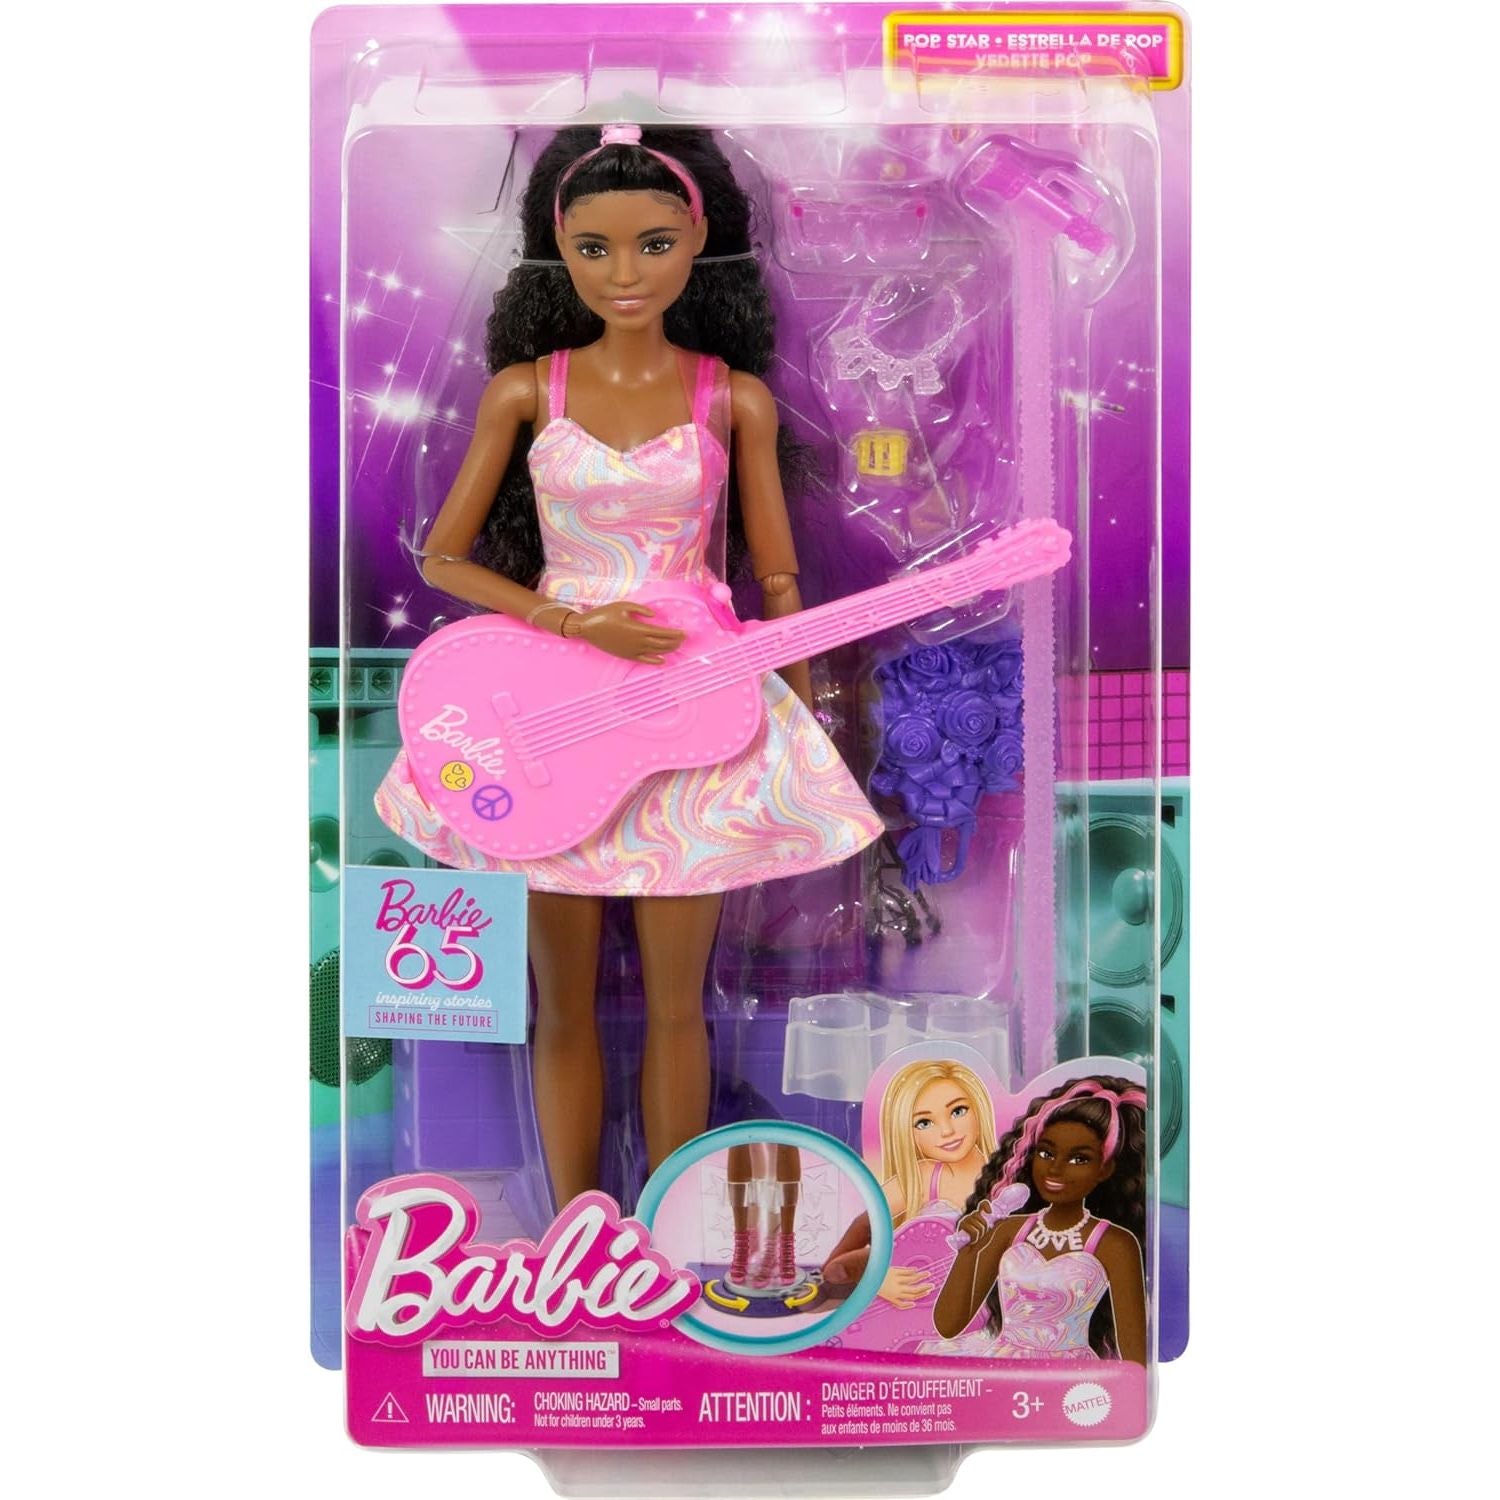 Barbie 65th Anniversary Doll & 10 Accessories, Pop Star Set with Brunette Singer Doll.